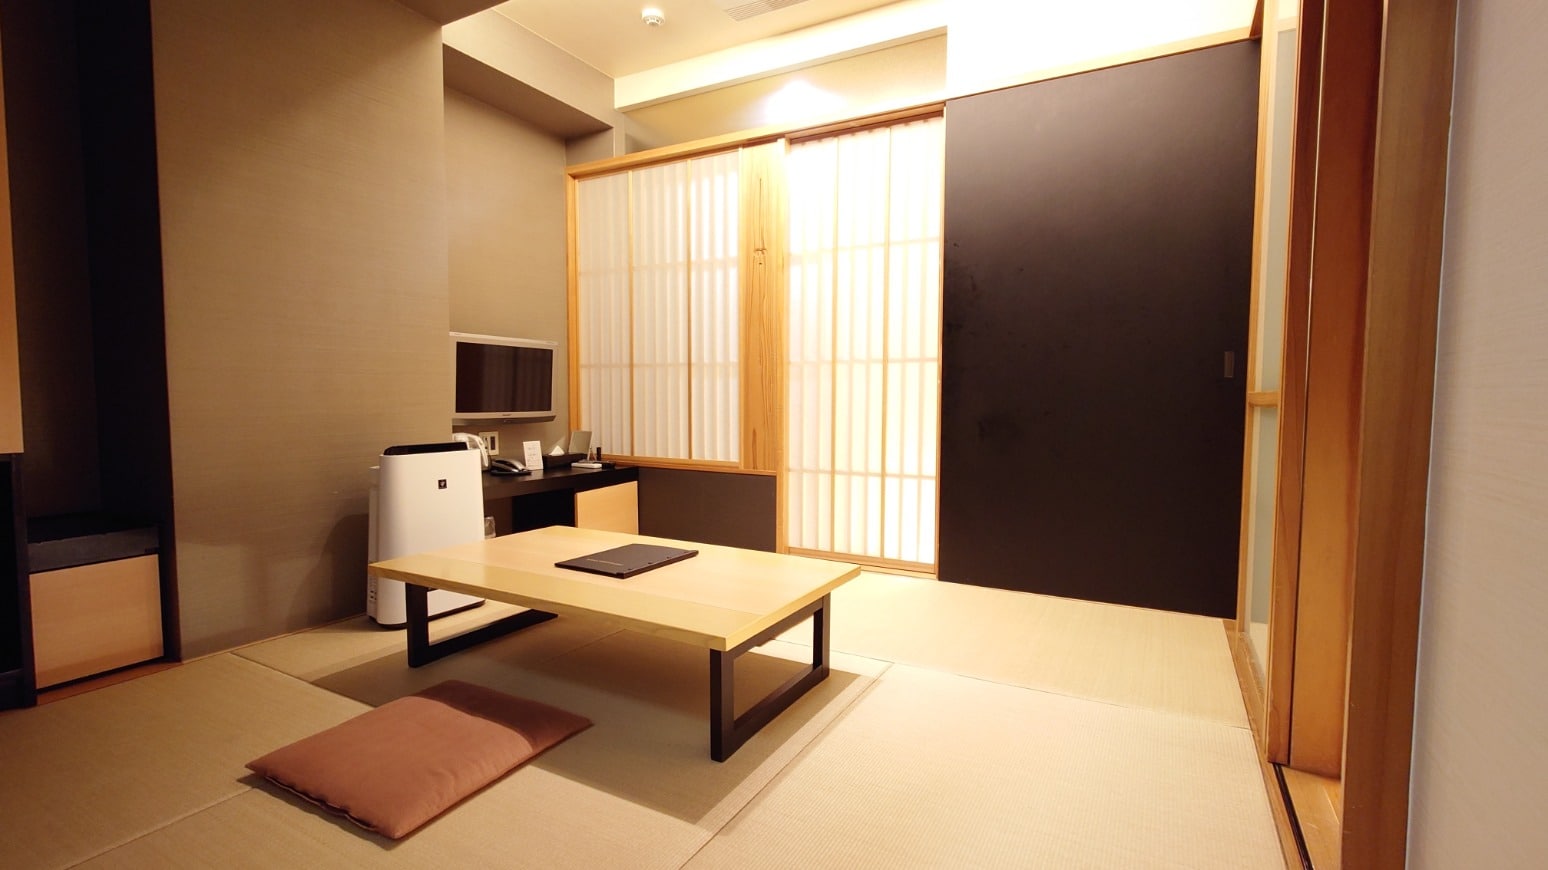 Deluxe twin room tatami room example